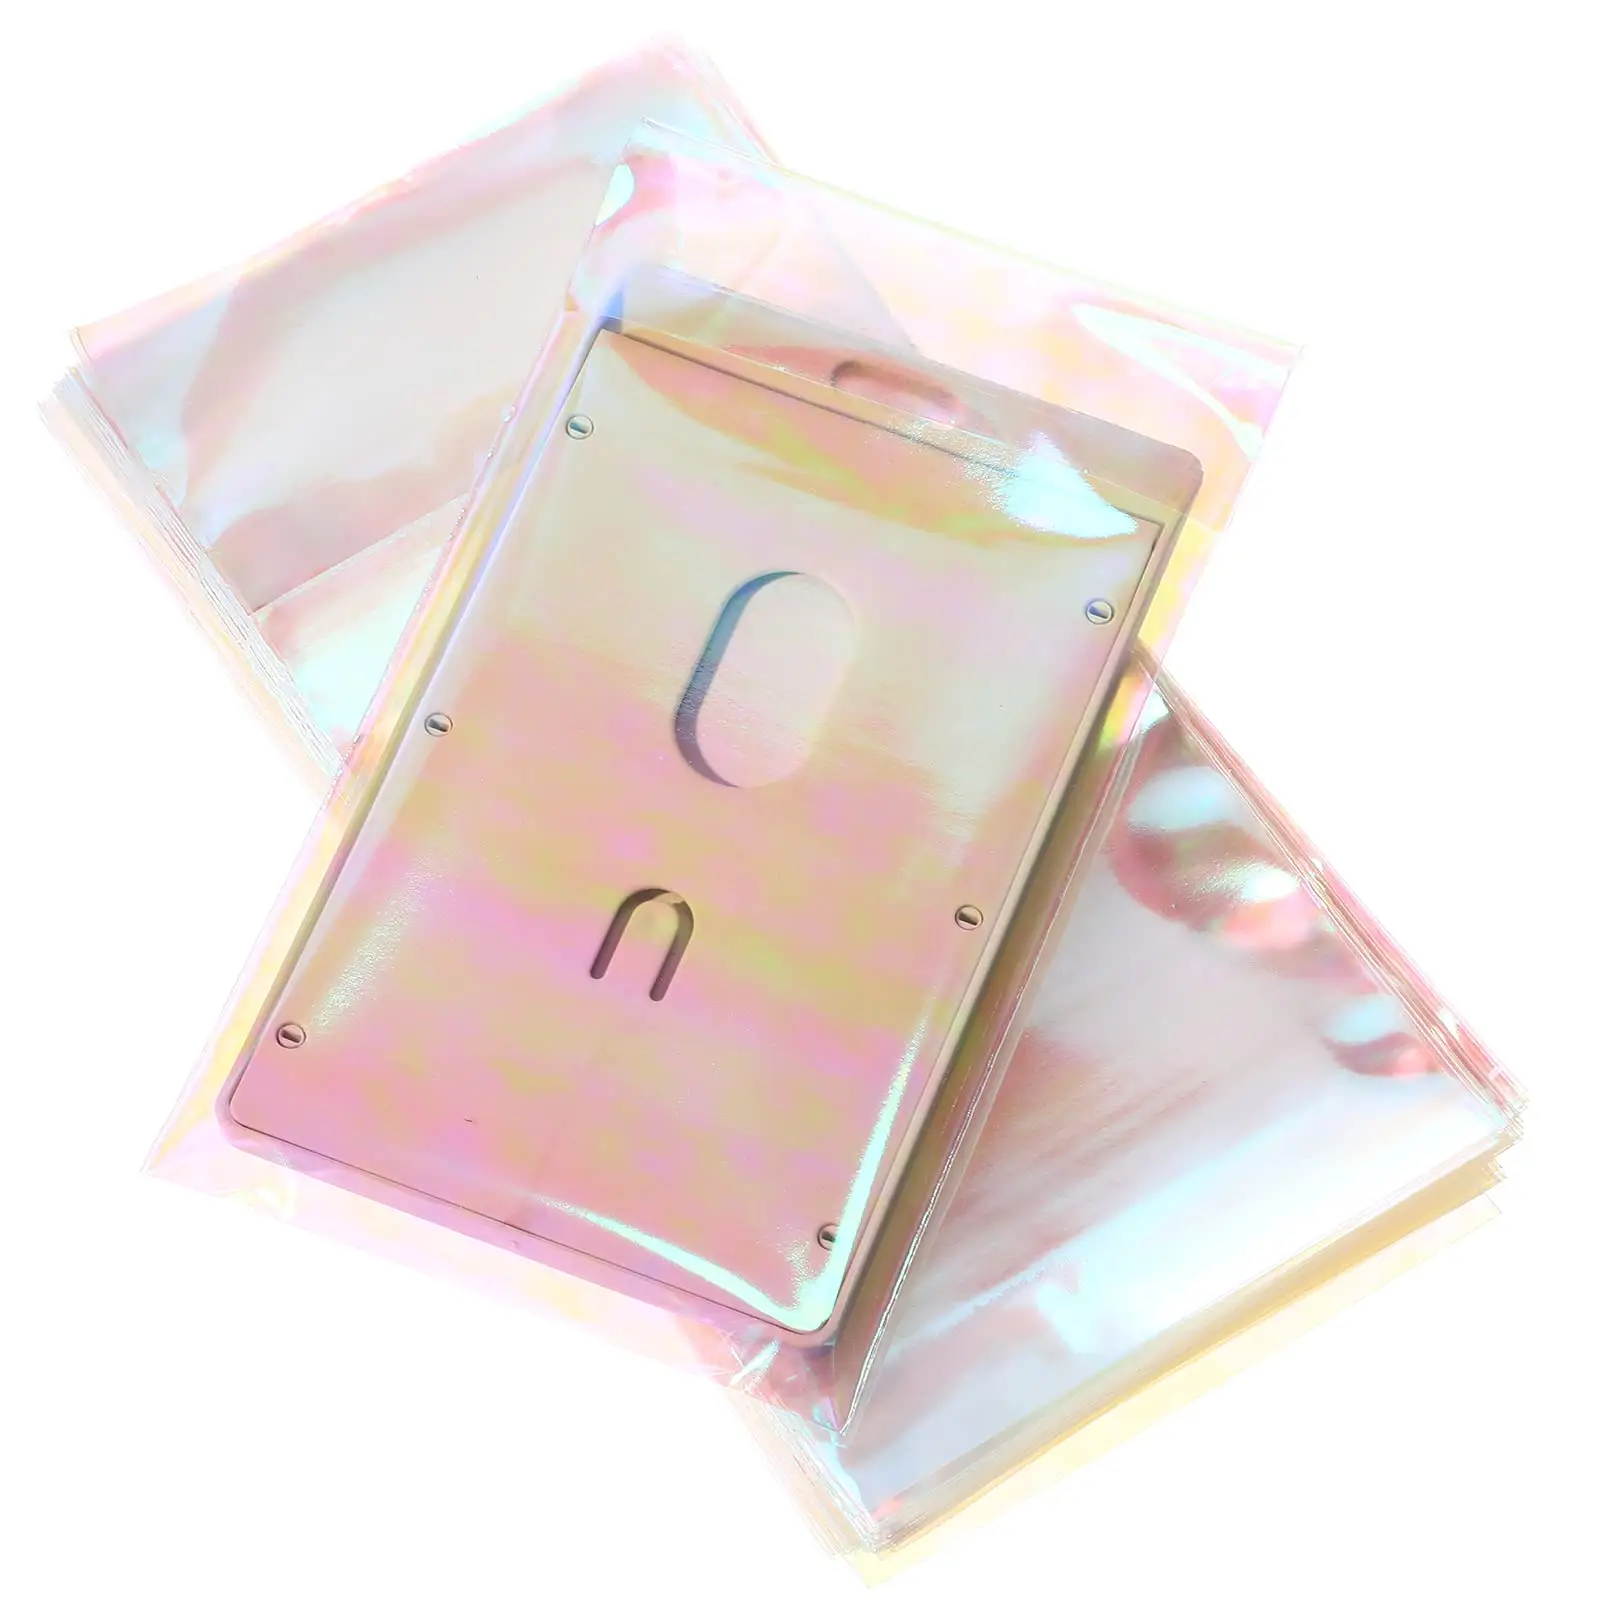 Iridescent Holographic Clear Plastic Candy Package Bags for Bakery Cookies Goodies Favor Decorative Wrappers